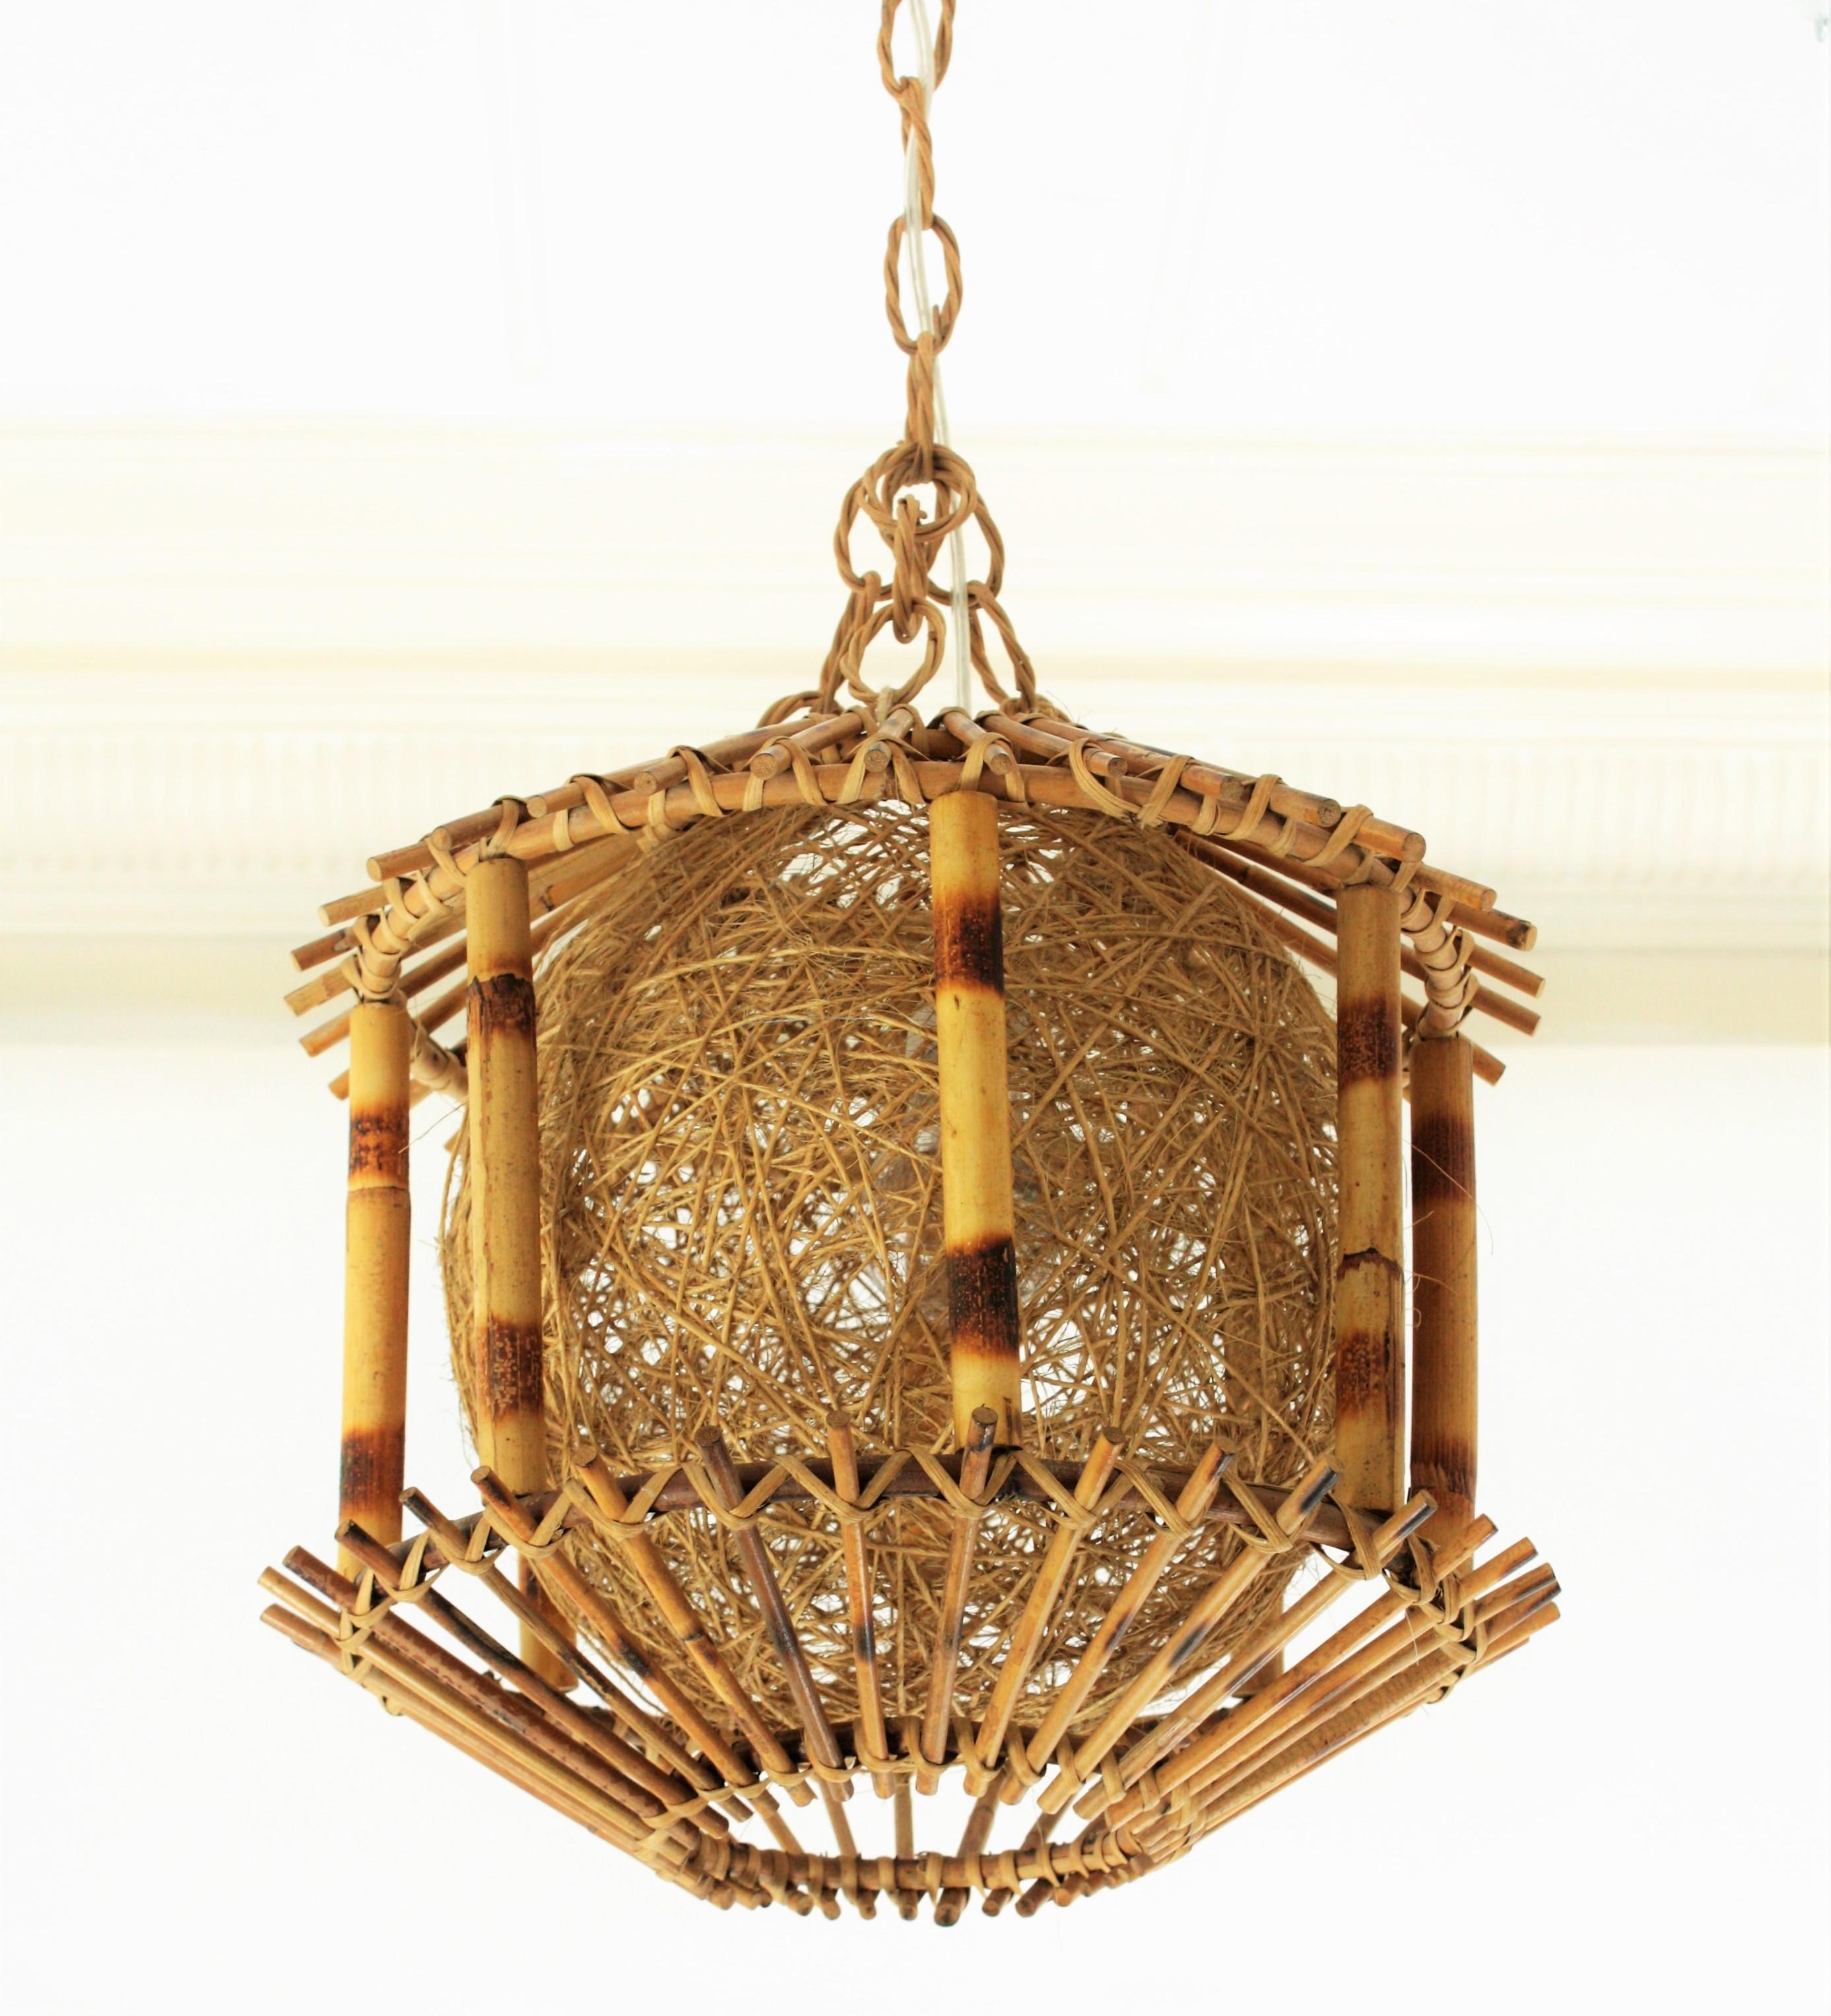 Unusual Spanish modernist bamboo and rattan pendant lamp or lantern with chinoiserie accents and a woven rope globe shade, Spain, 1950s.
This sculptural oriental inspired lamp is hanging from a rattan chain and it has a charming light when lit.